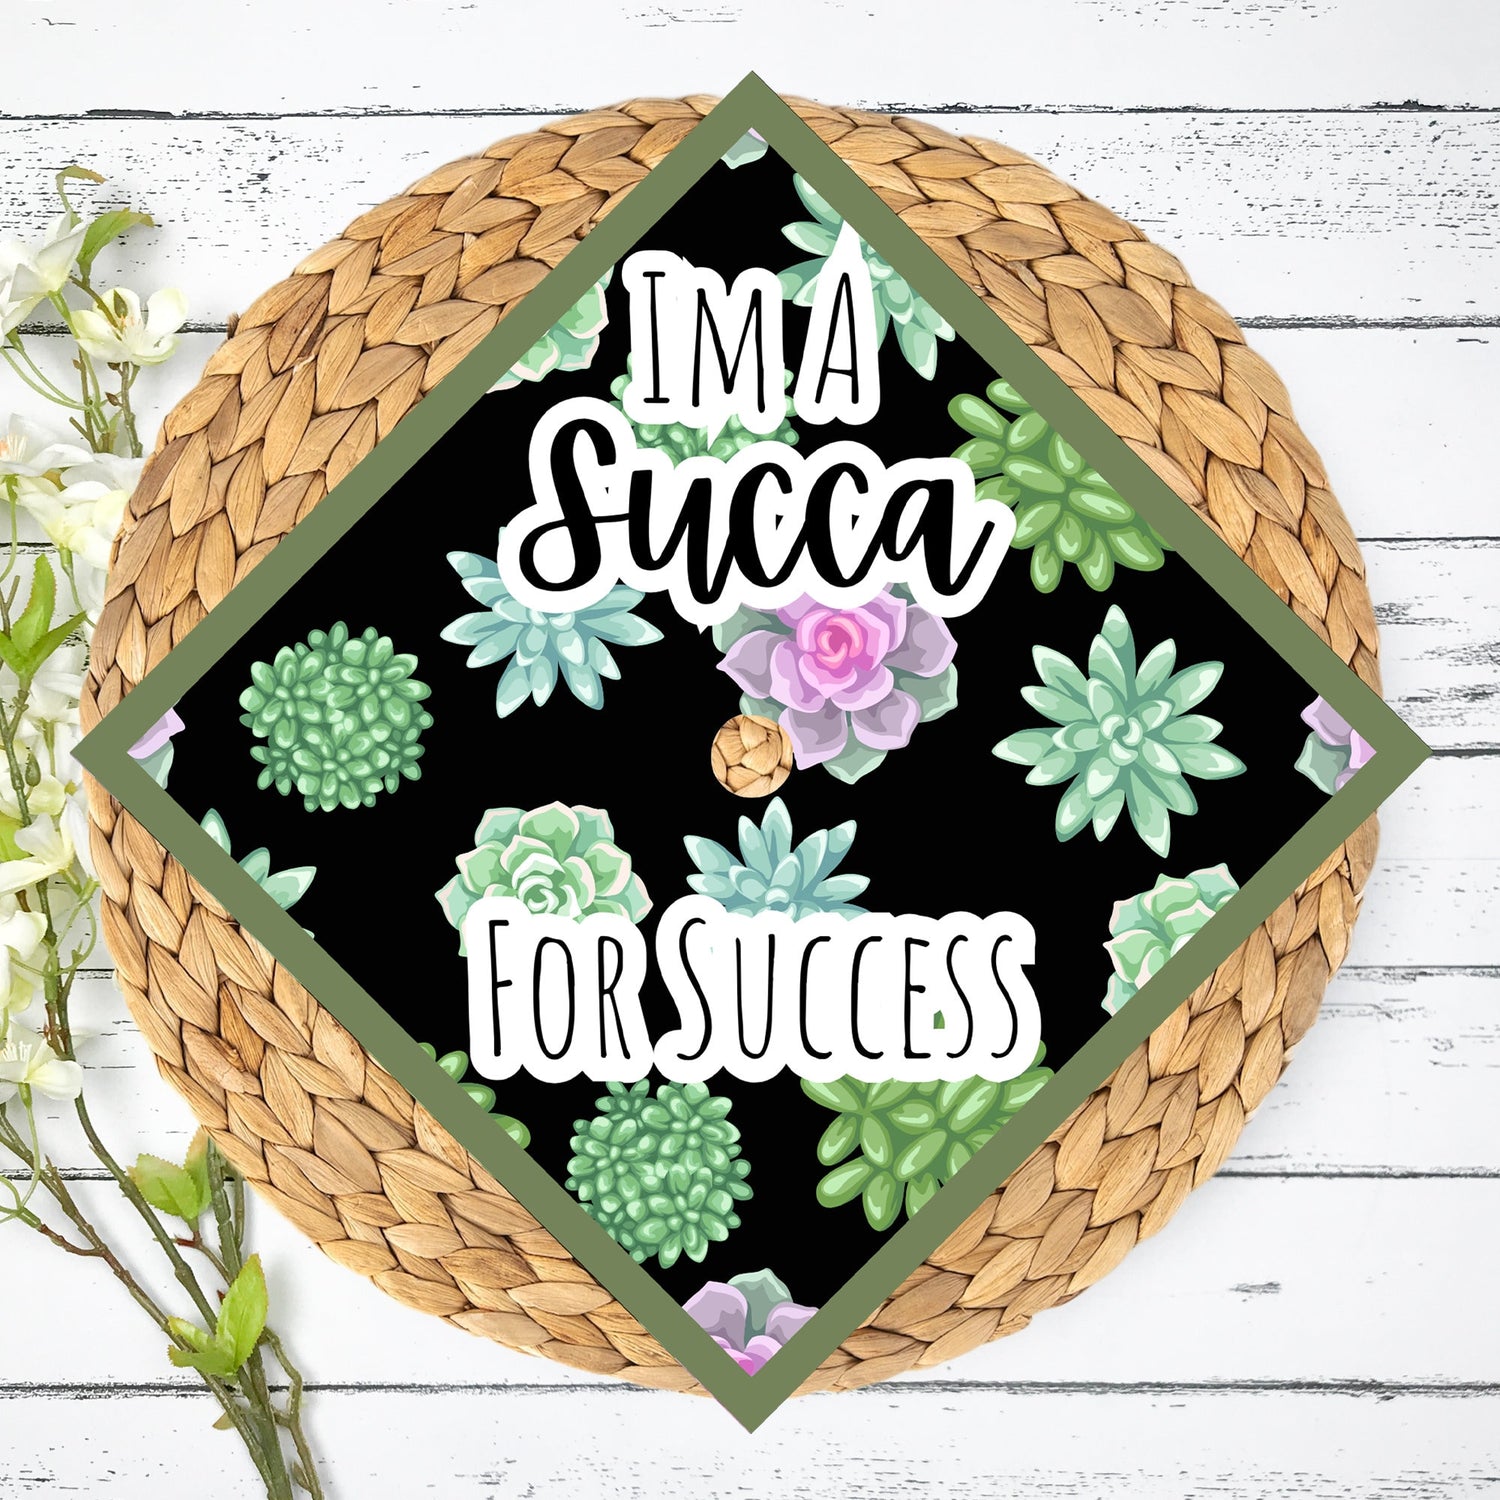 Graduation Cap Topper- Mortarboard - Inspirational Quotes - READY TO SHIP - I'm a succa for success